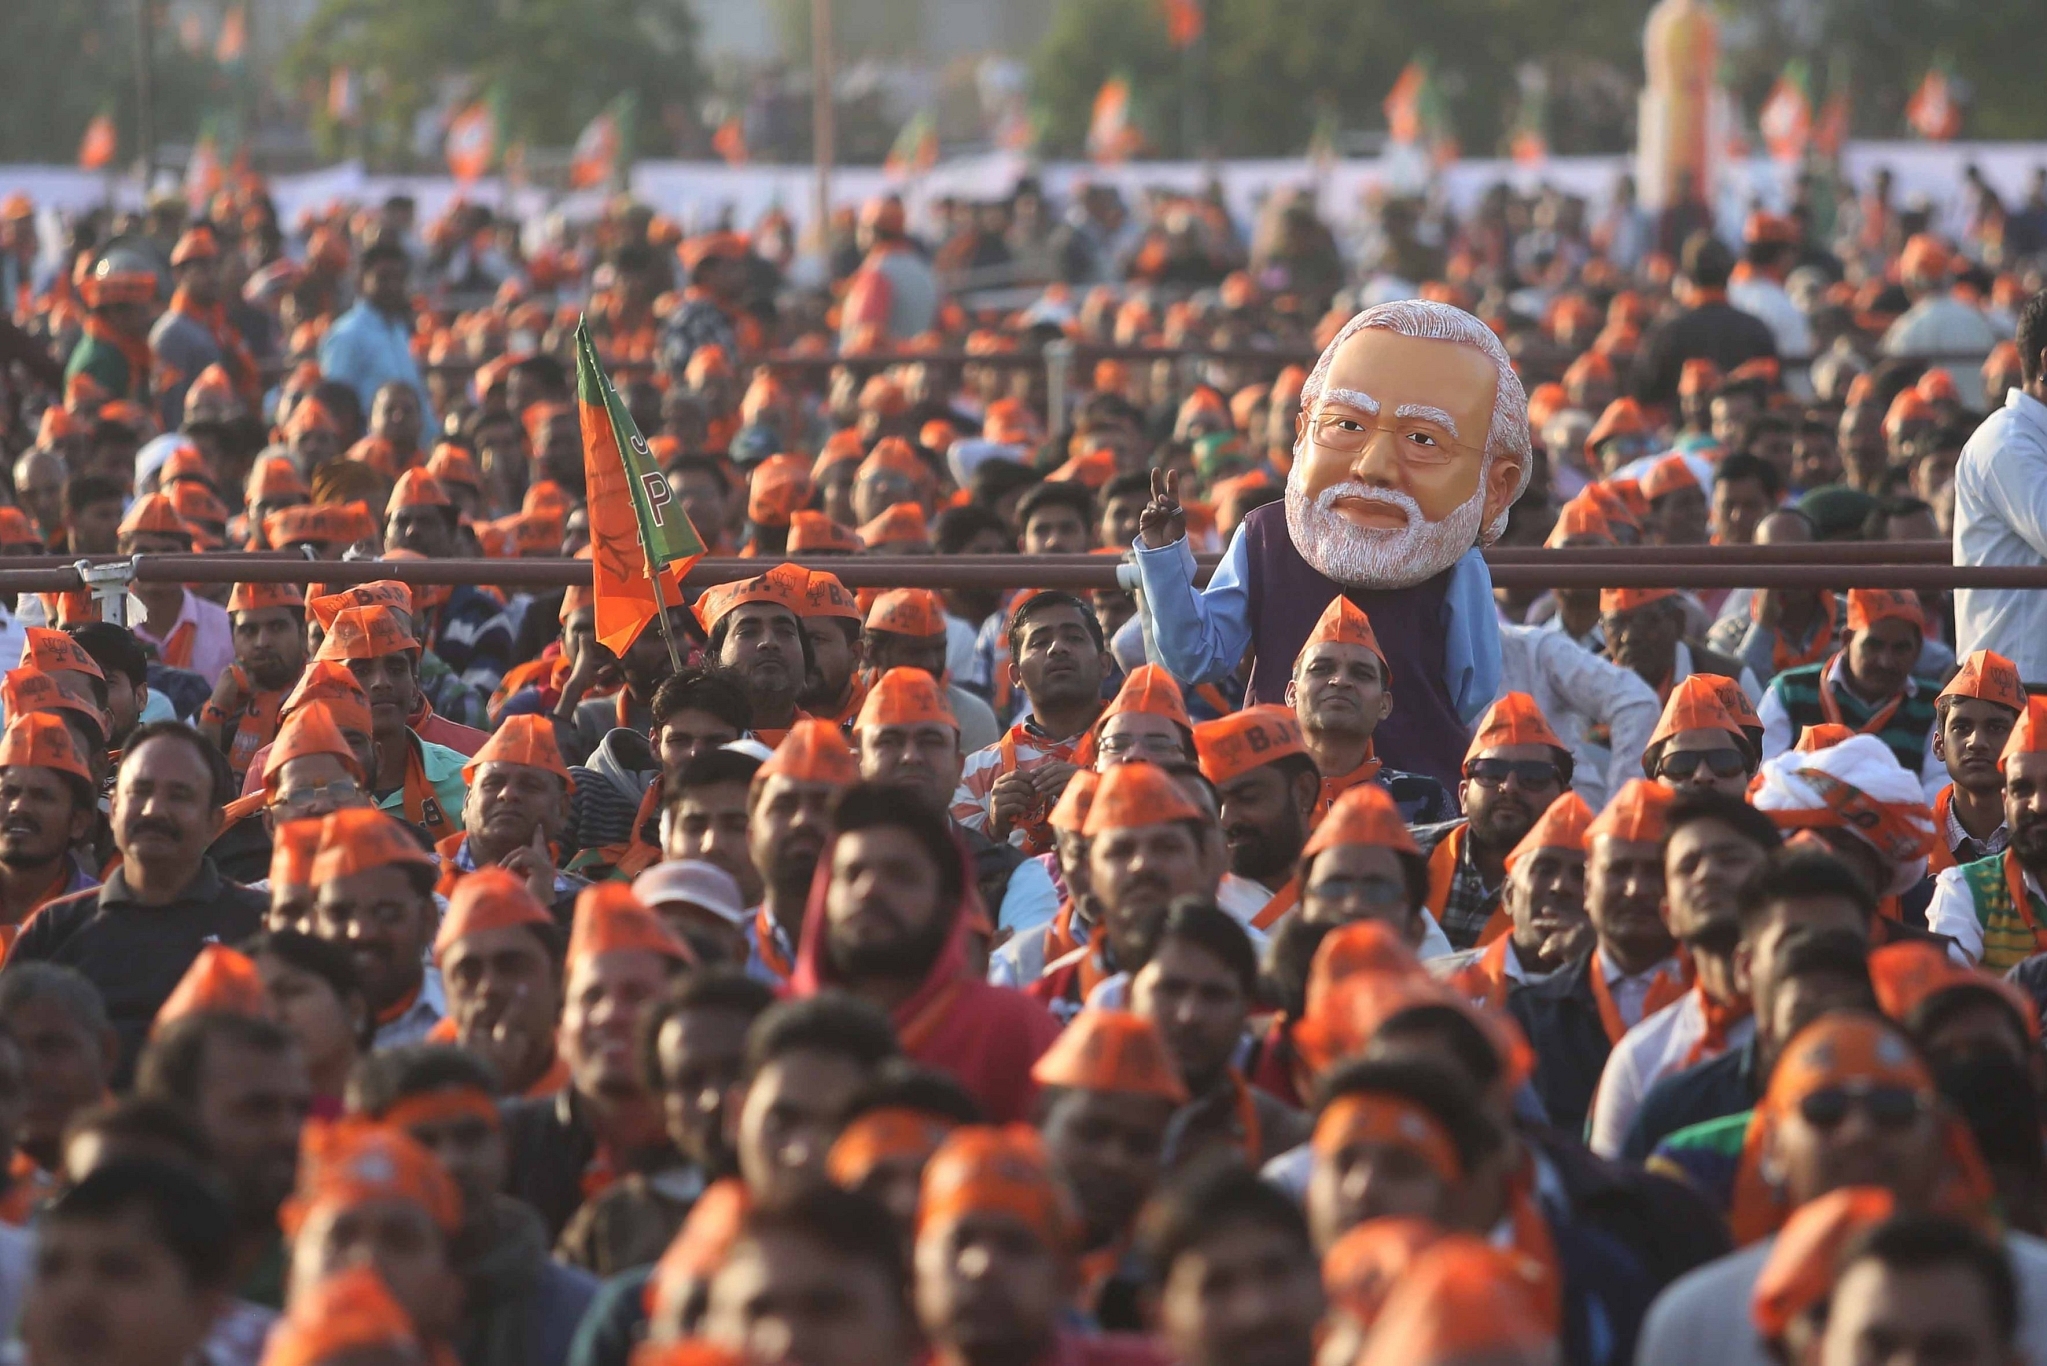 BJP supporters at a campaign rally of Prime Minister Narendra Modi.(Himanshu Vyas/Hindustan Times via Getty Images)